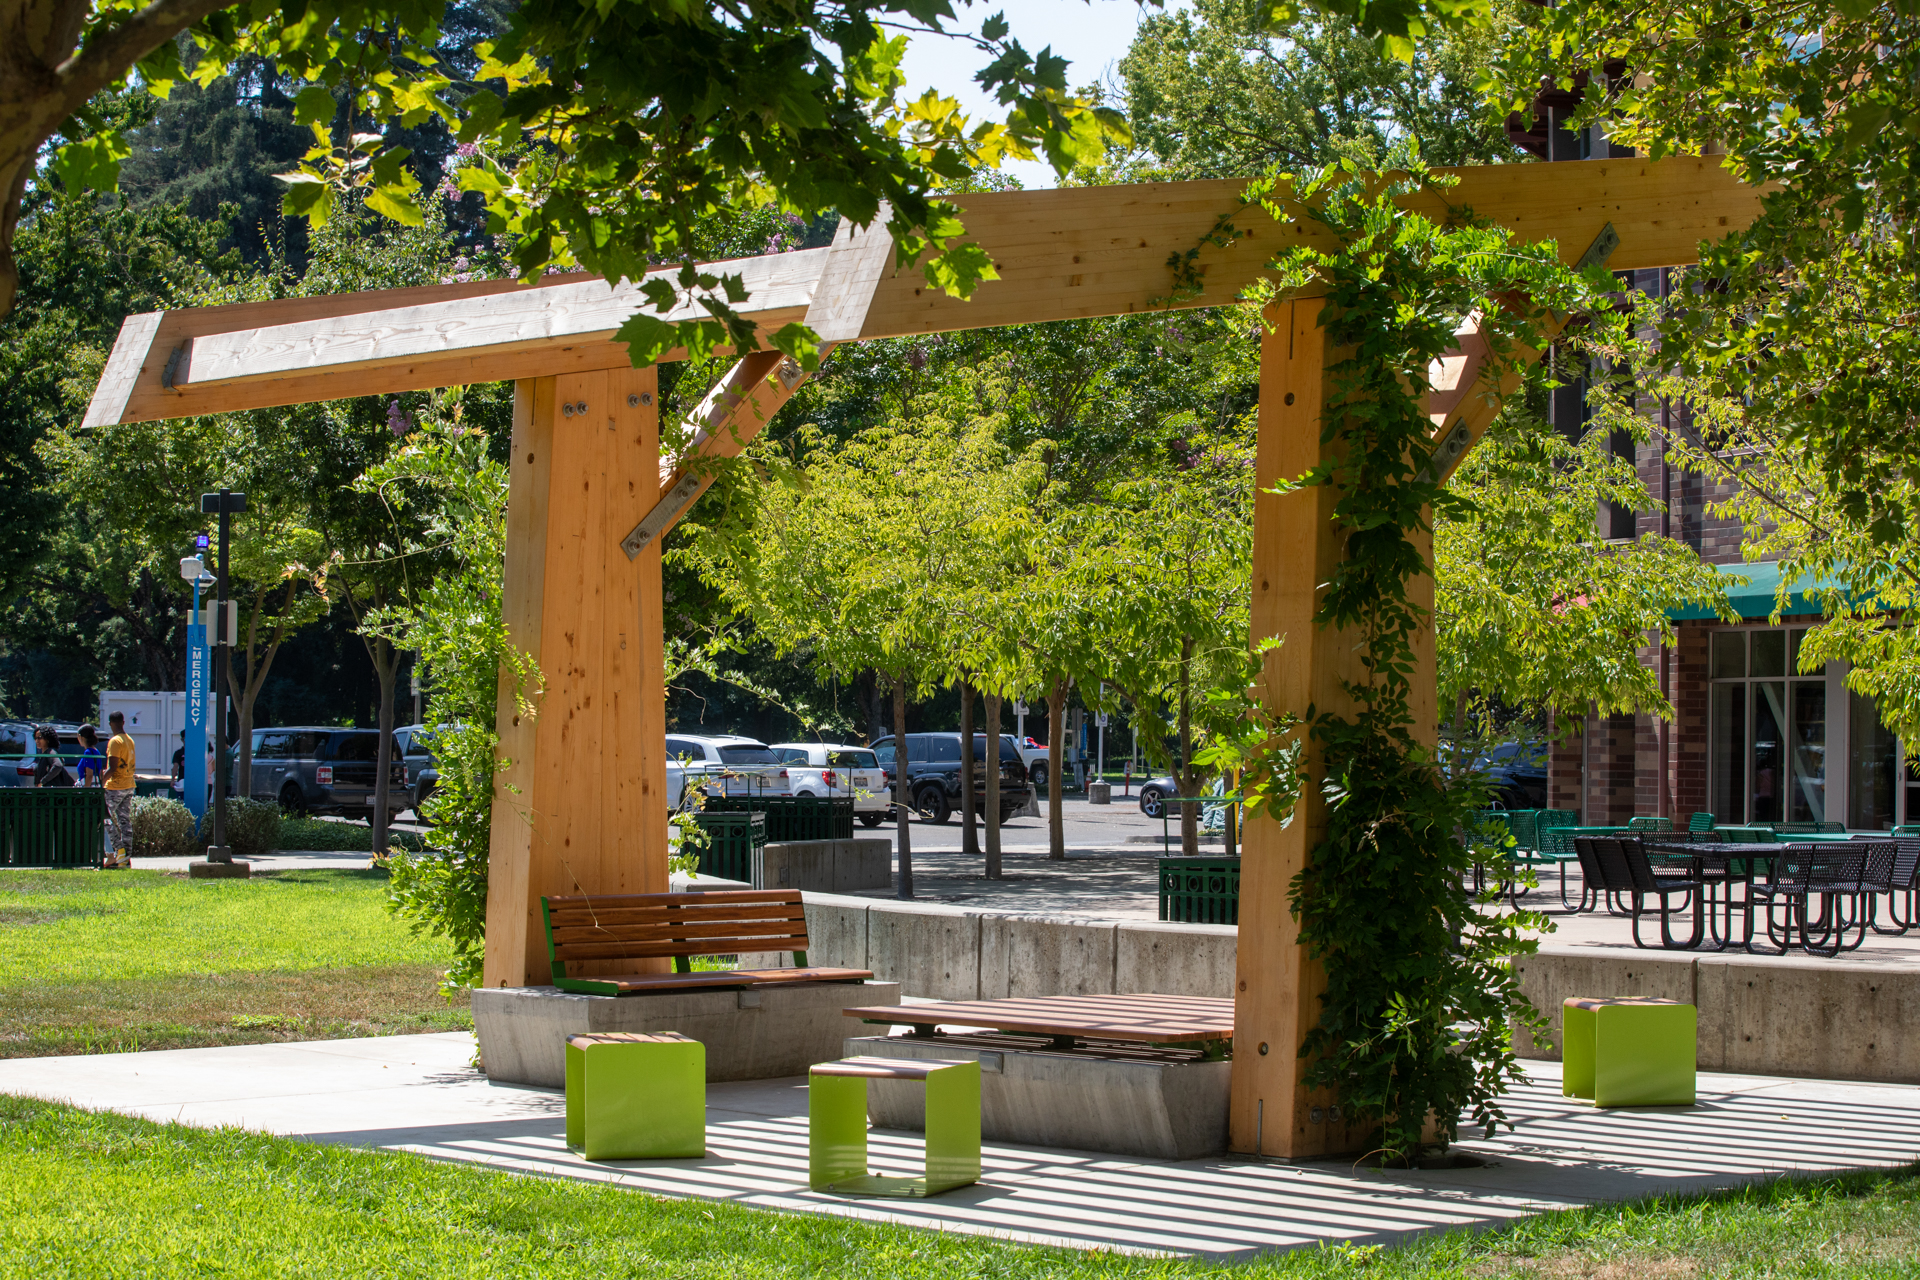 One of eight new pergolas on campus provides seating and shade for students.